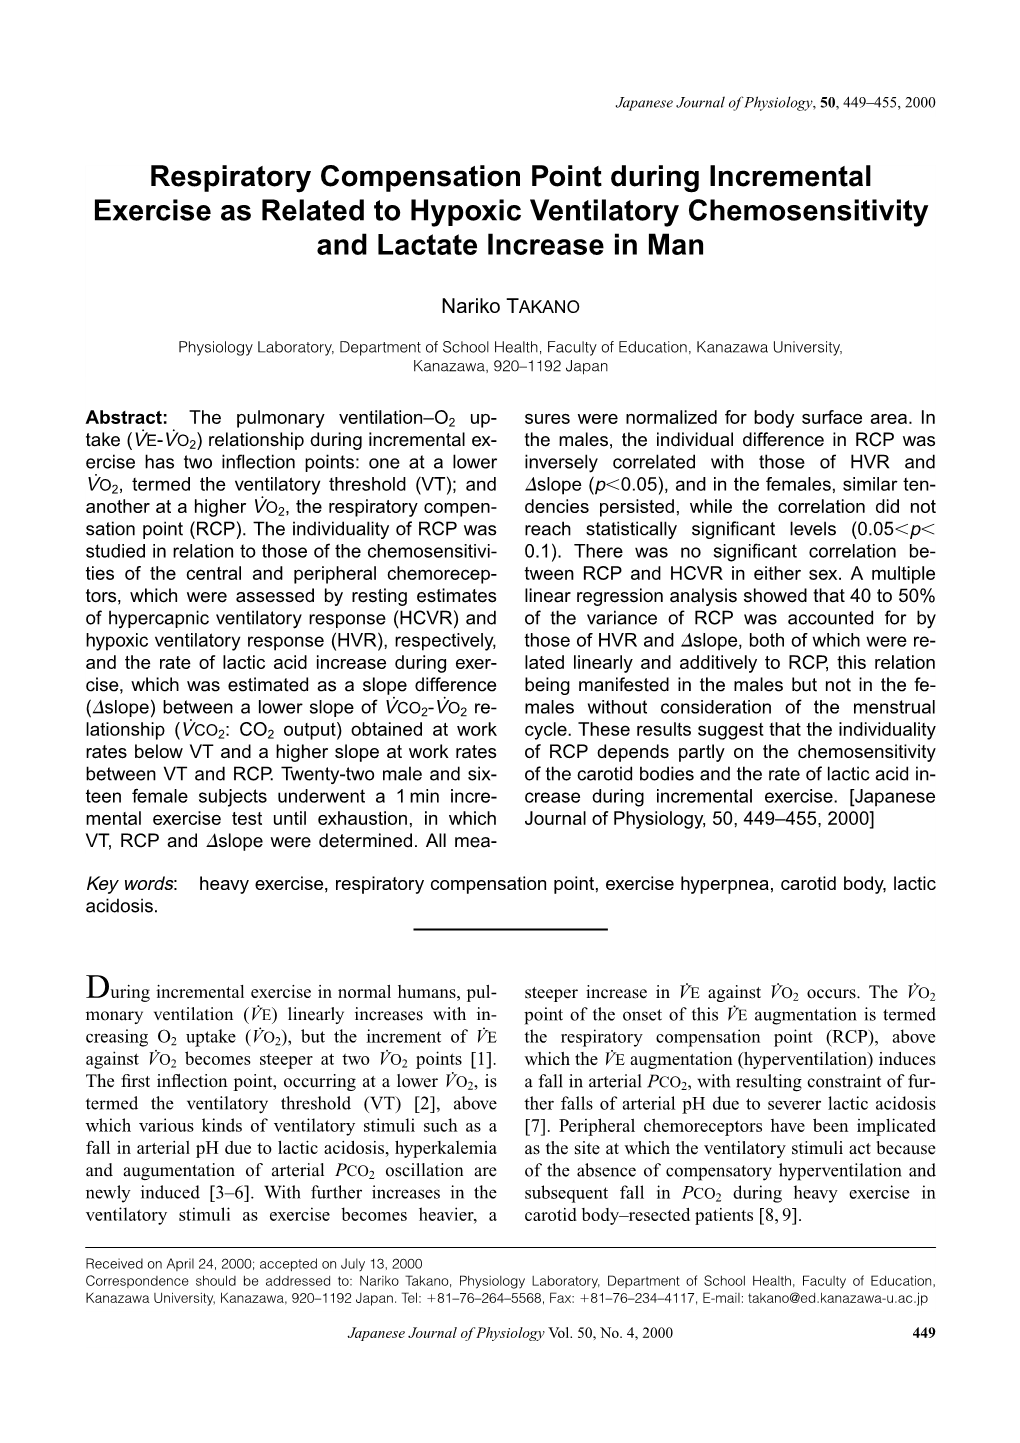 Respiratory Compensation Point During Incremental Exercise As Related to Hypoxic Ventilatory Chemosensitivity and Lactate Increase in Man